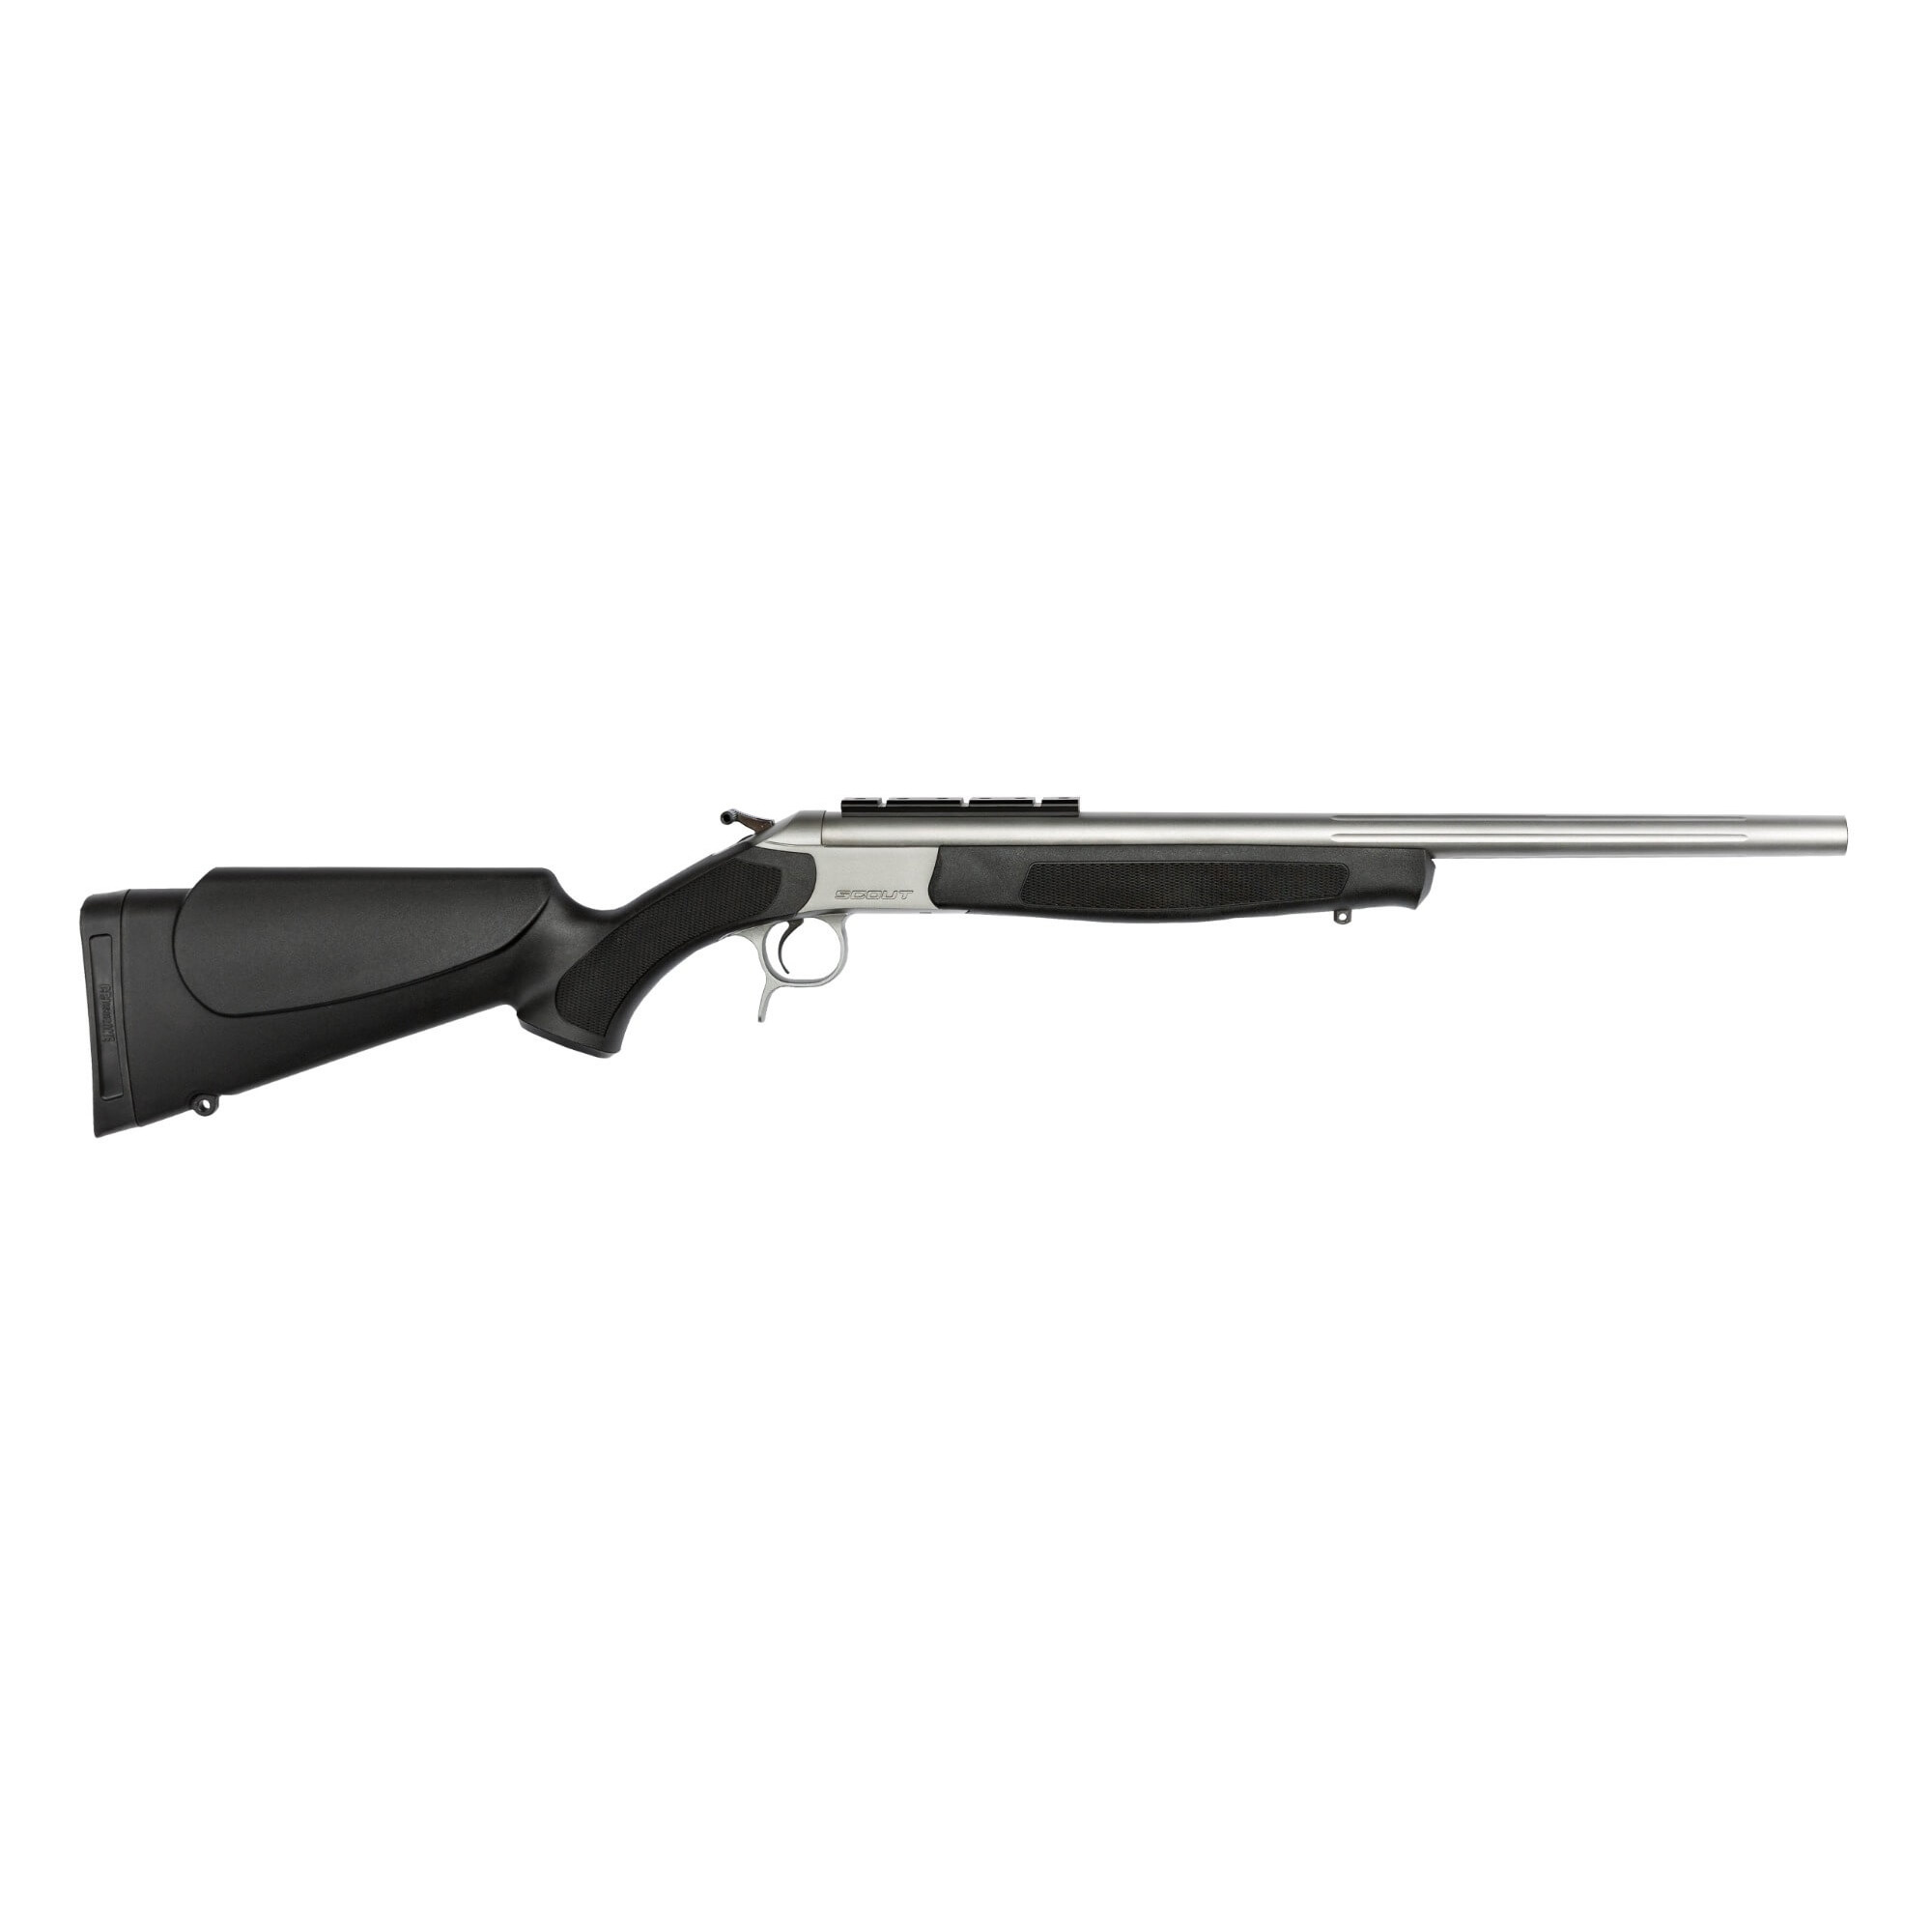 CVA, Scout, Single Shot Rifle, 243 Winchester, 20" Threaded Fluted Barrel, 5/8x24, Stainless Steel Finish, Synthetic Stock, Black, Ambidextrous, Scope Rail, 1 Round